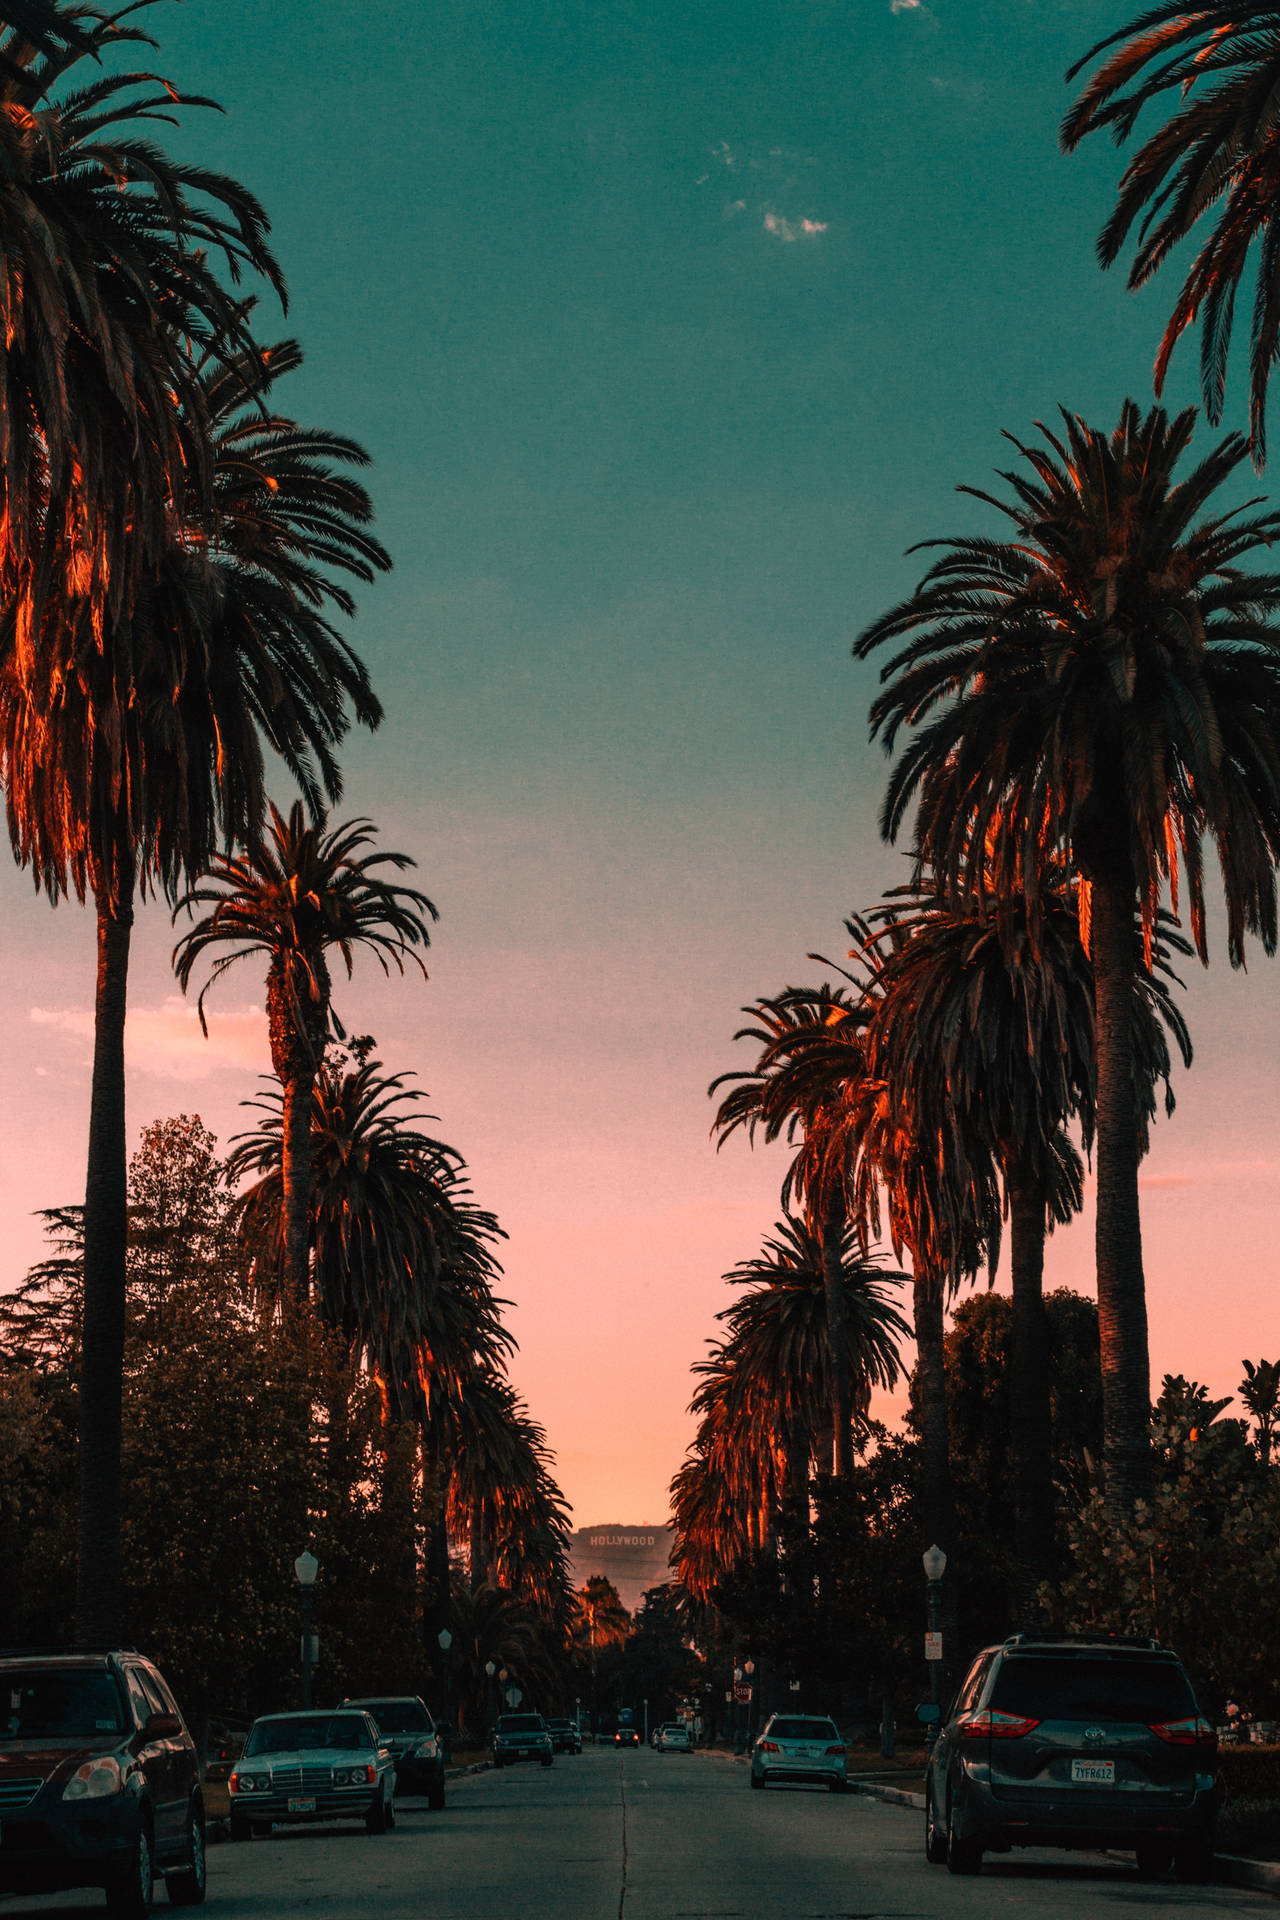 Los Angeles Iphone California Trees And Sky At Sunset Wallpaper